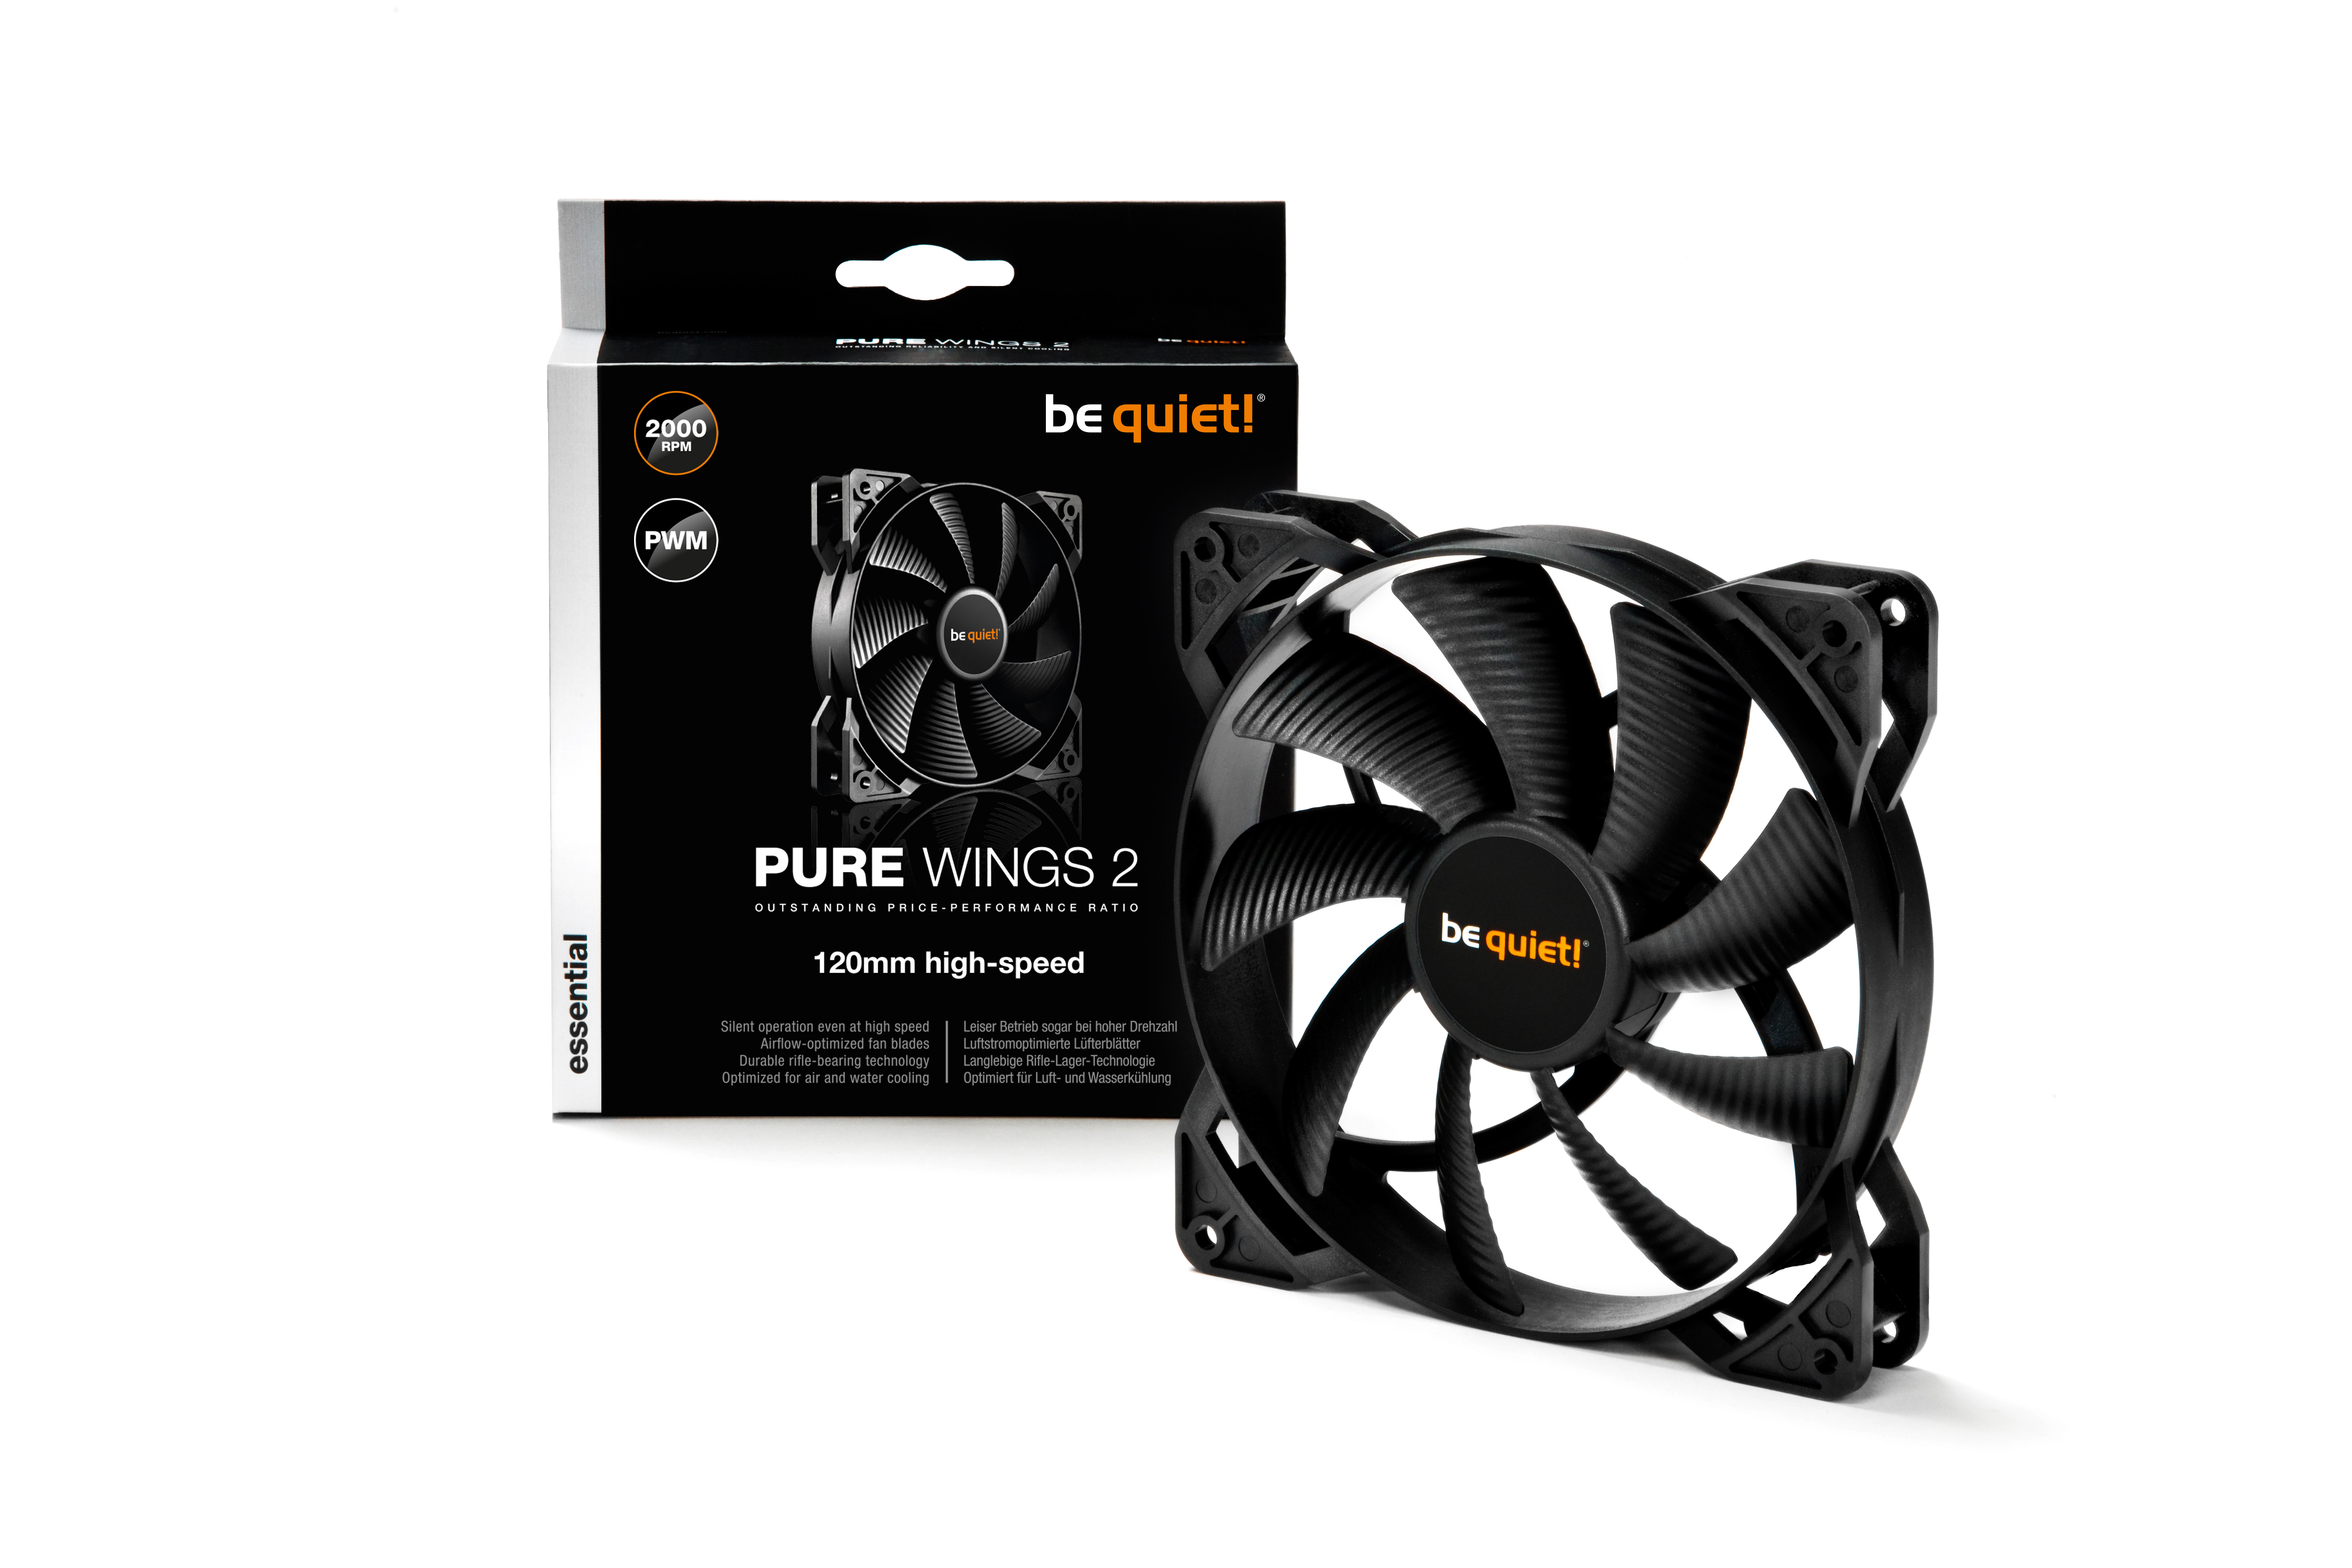 be quiet! PURE WINGS 2 120mm PWM high-speed